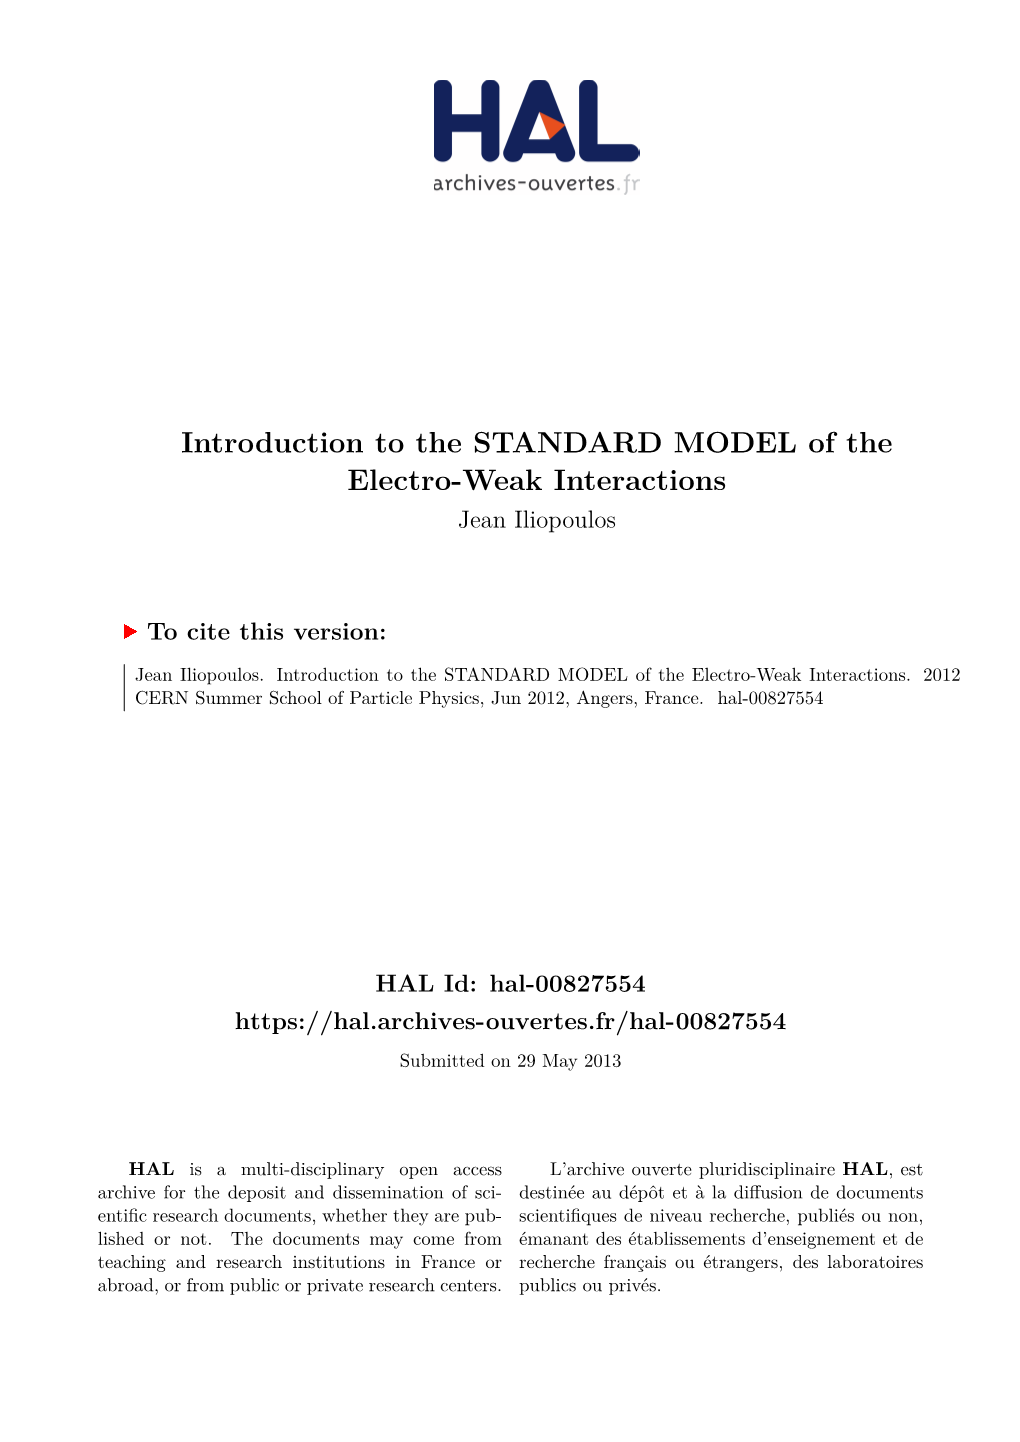 Introduction to the STANDARD MODEL of the Electro-Weak Interactions Jean Iliopoulos